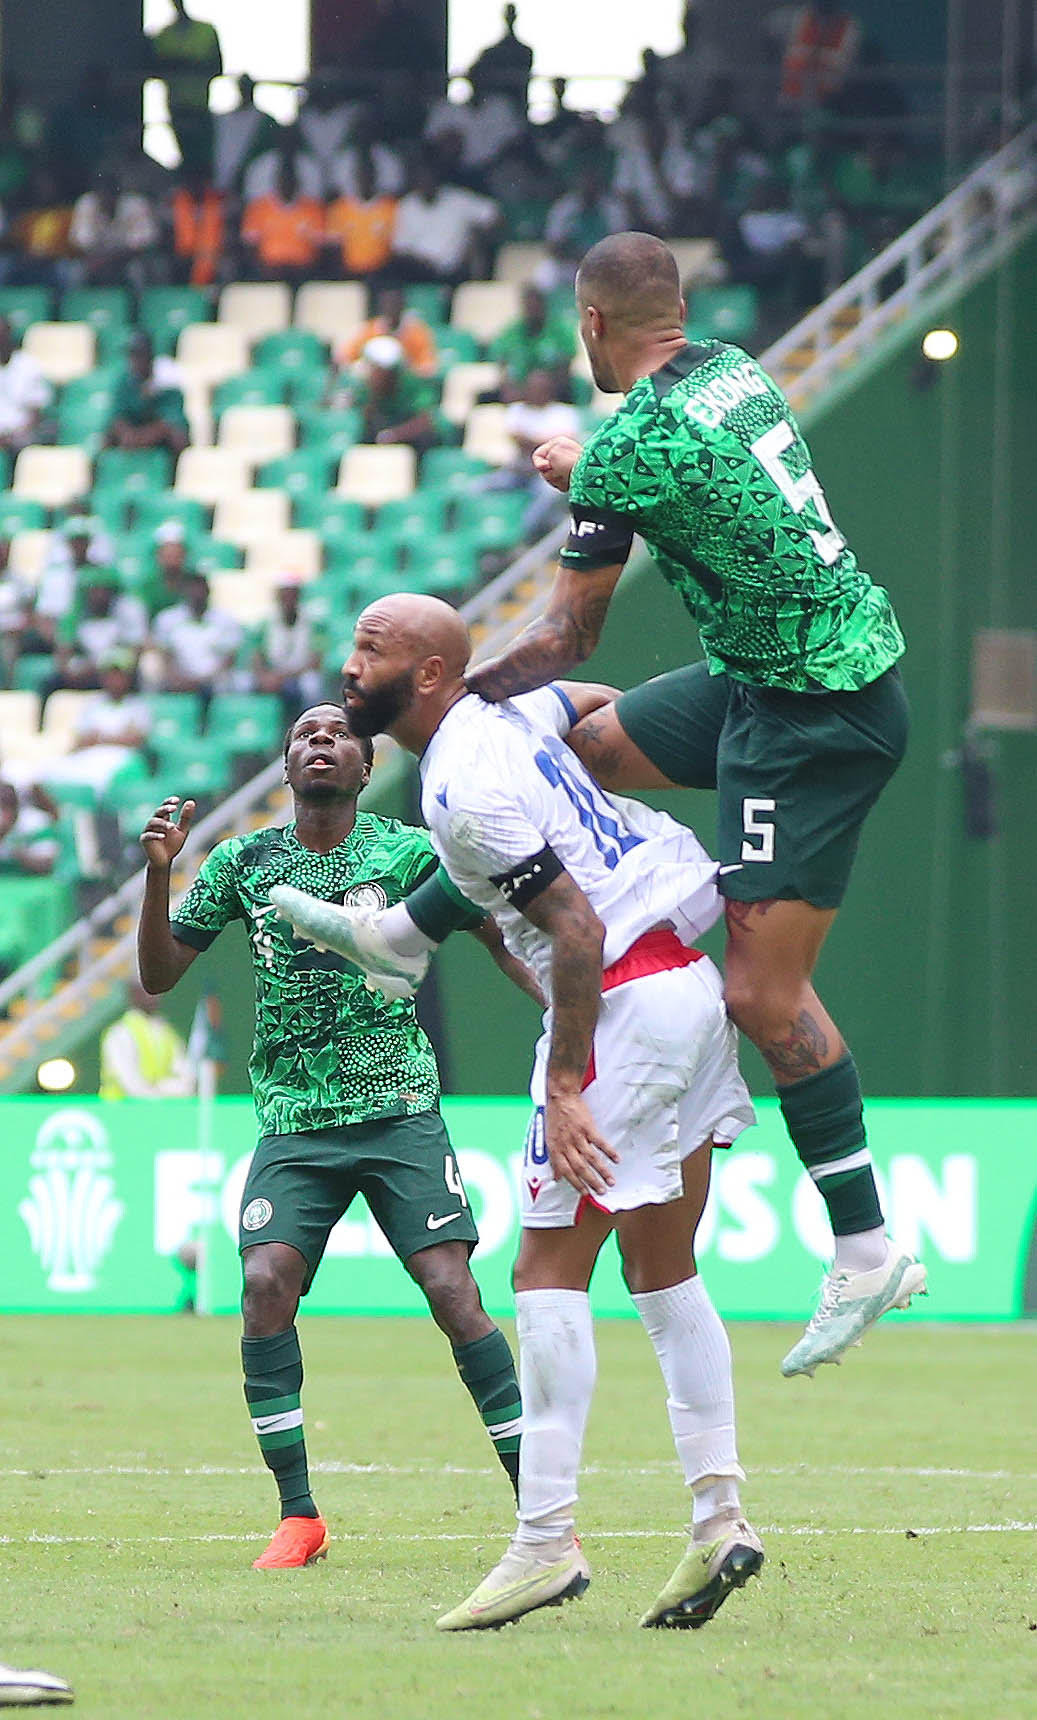 AFCON 2023: Eagles look forward to ‘interesting encounter’ with Elephants